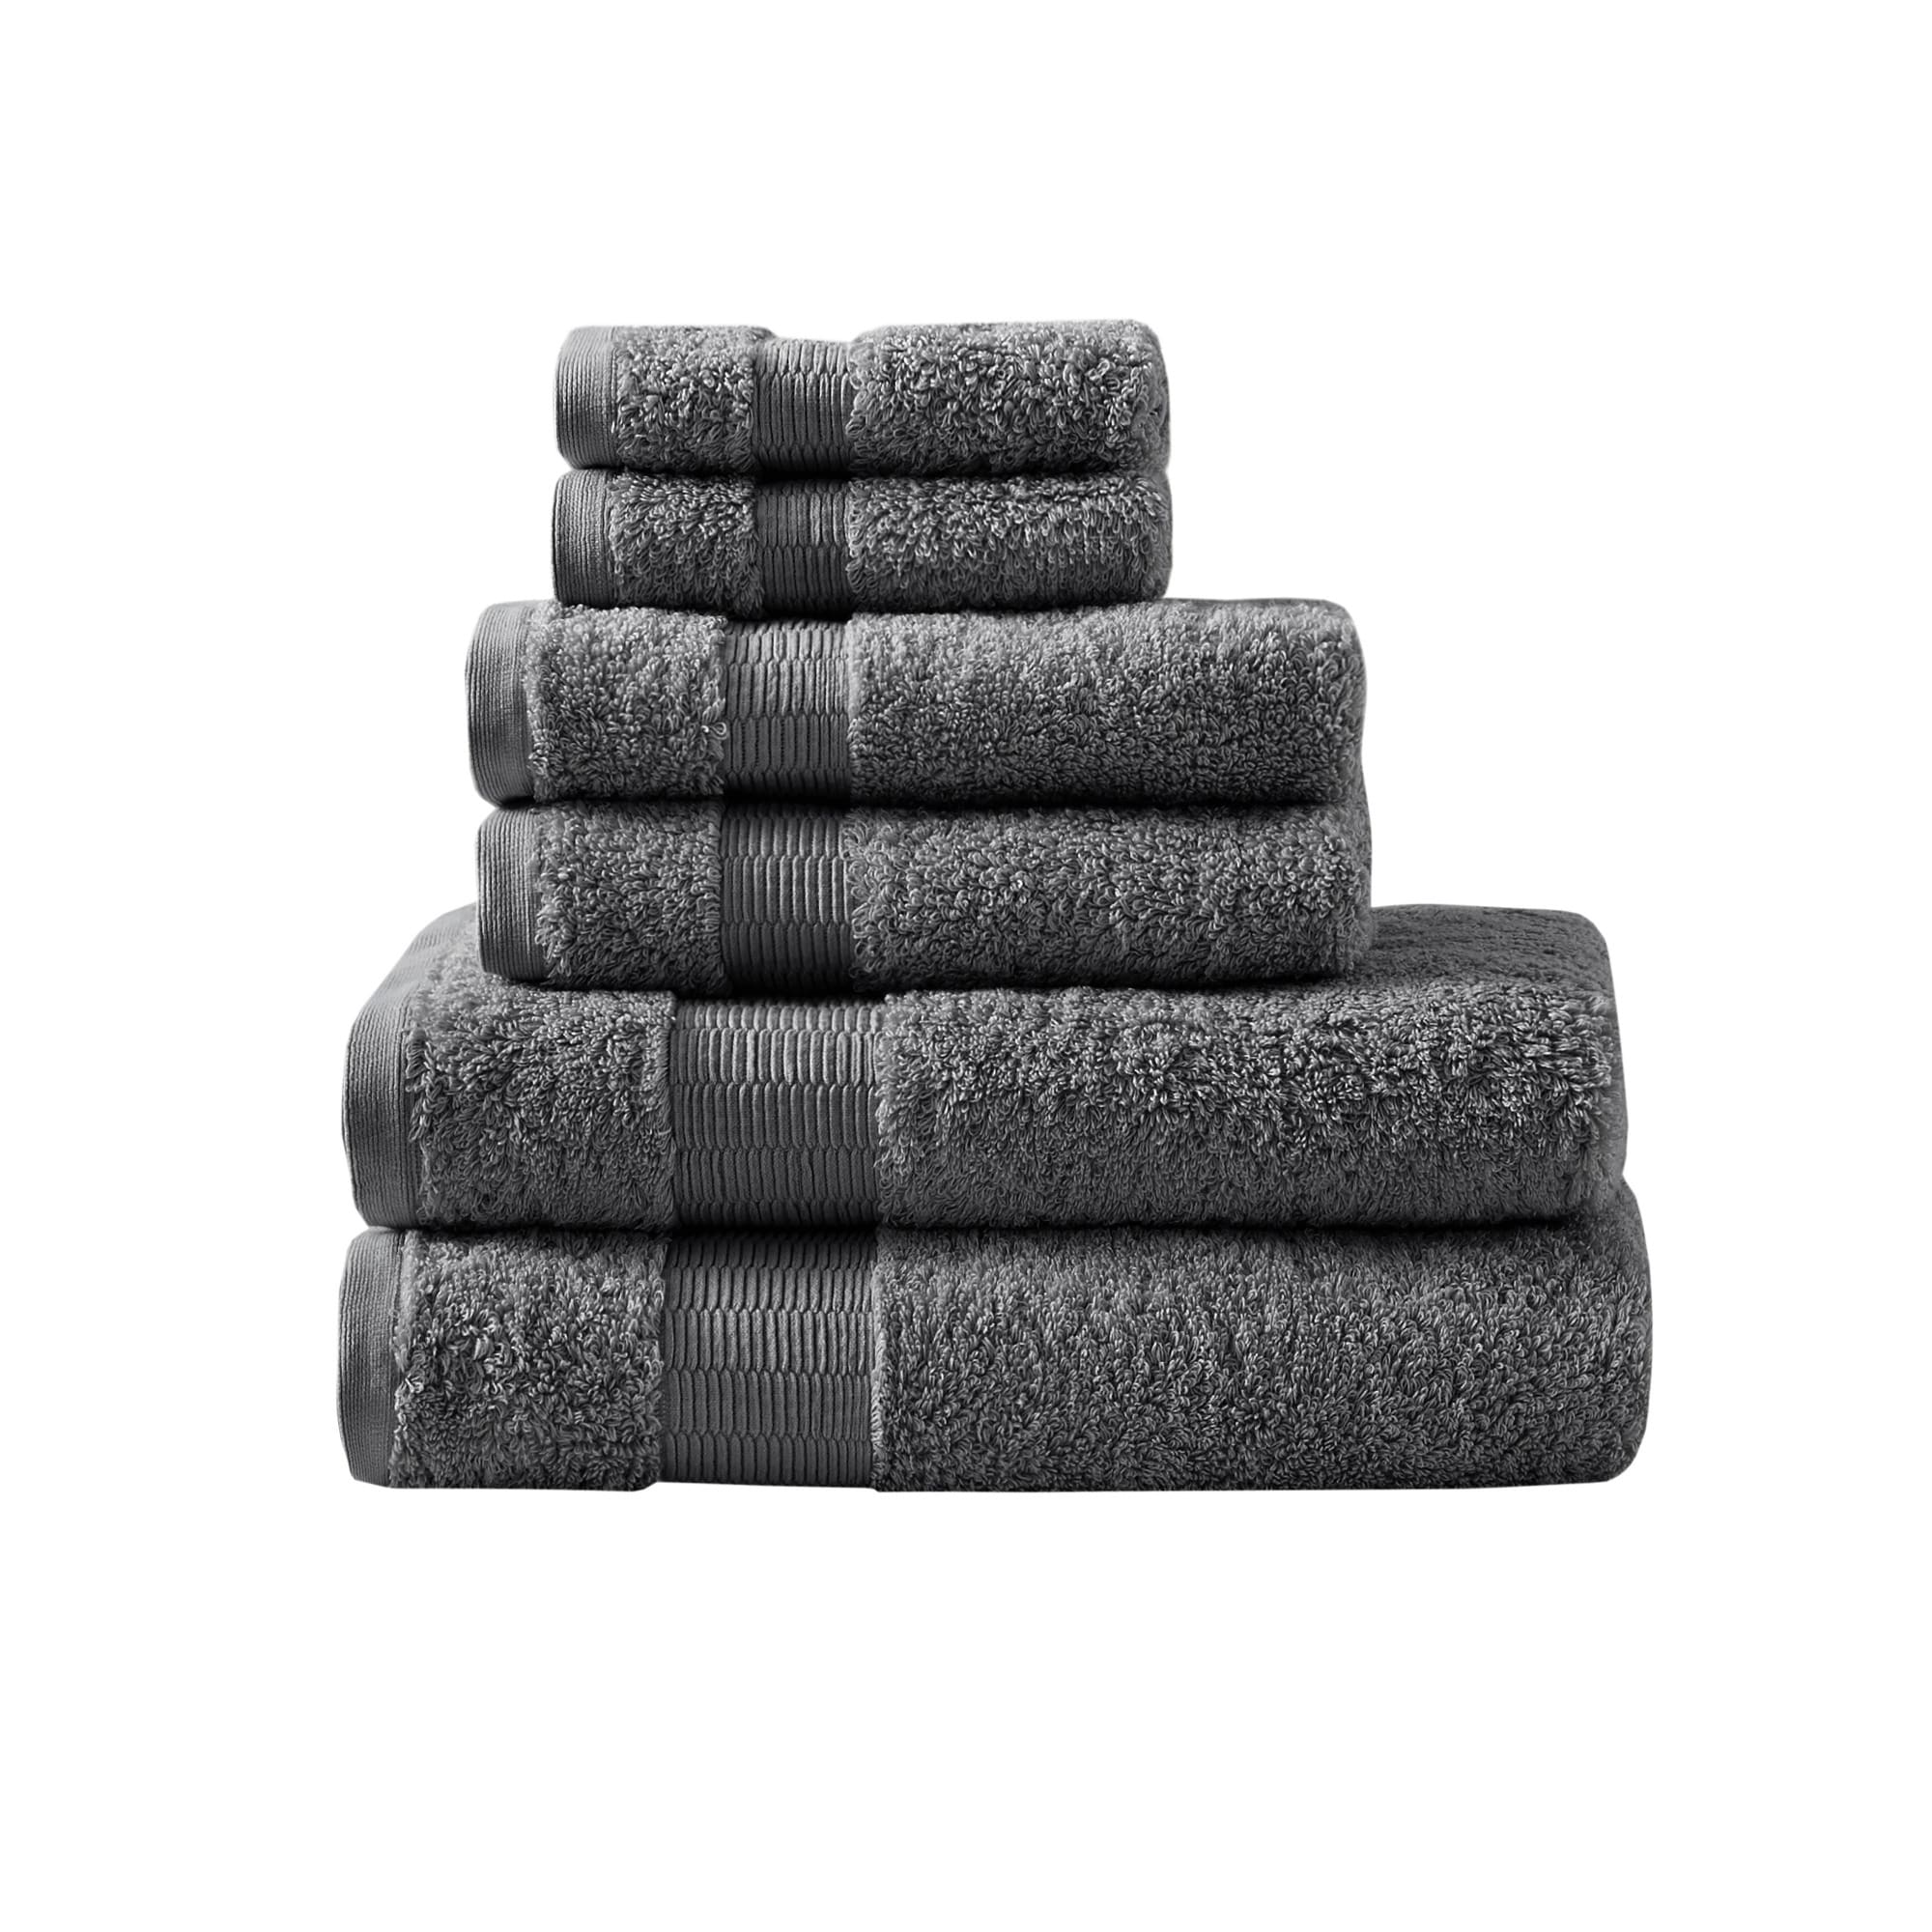 MGM Grand Signature Towel Set in 100% Cotton